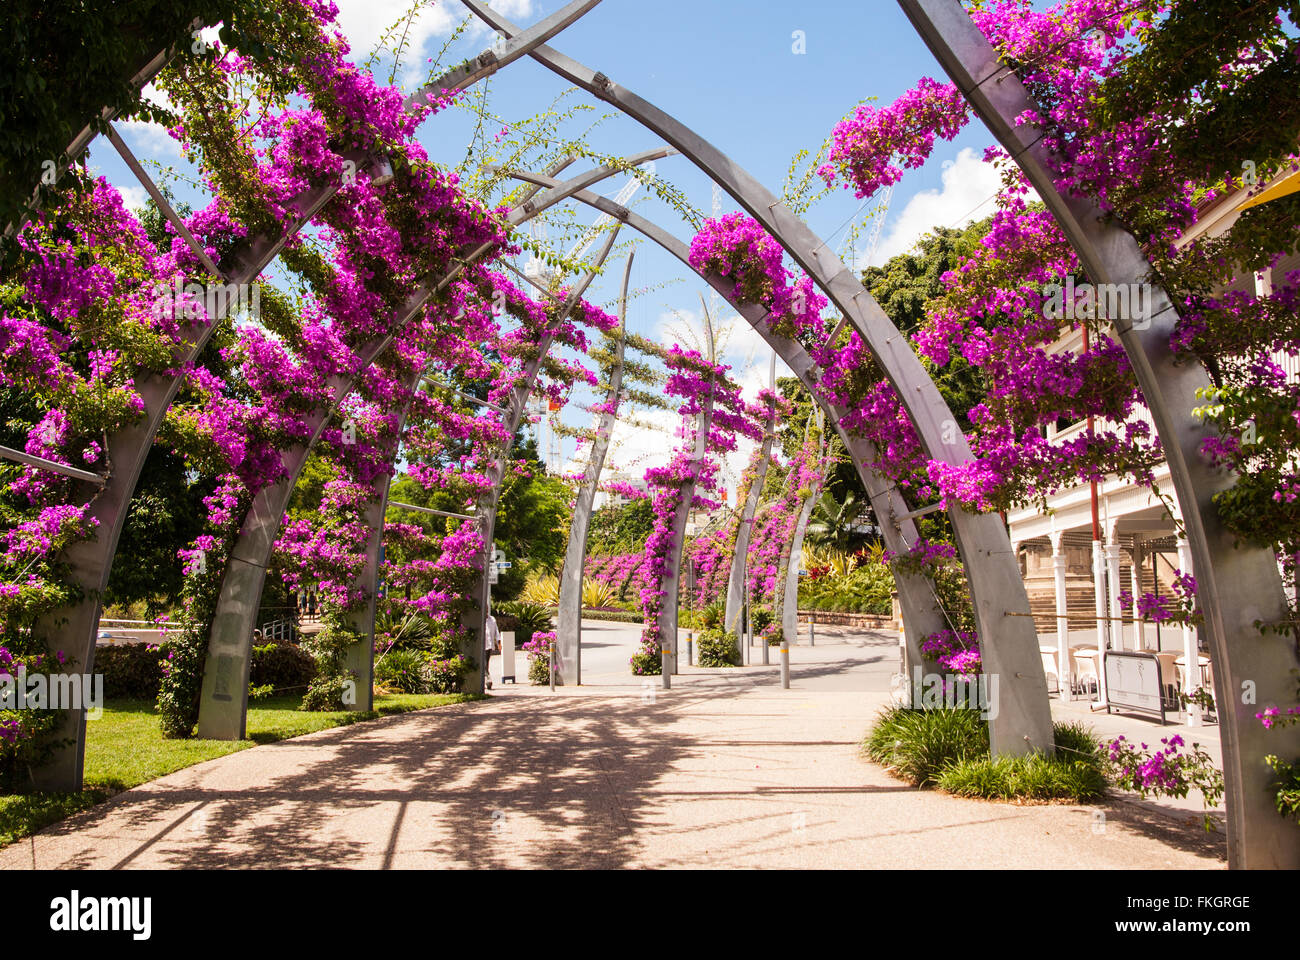 Pink bougainvillea on arches over walkway, Southbank gardens, Brisbane, Australia Stock Photo